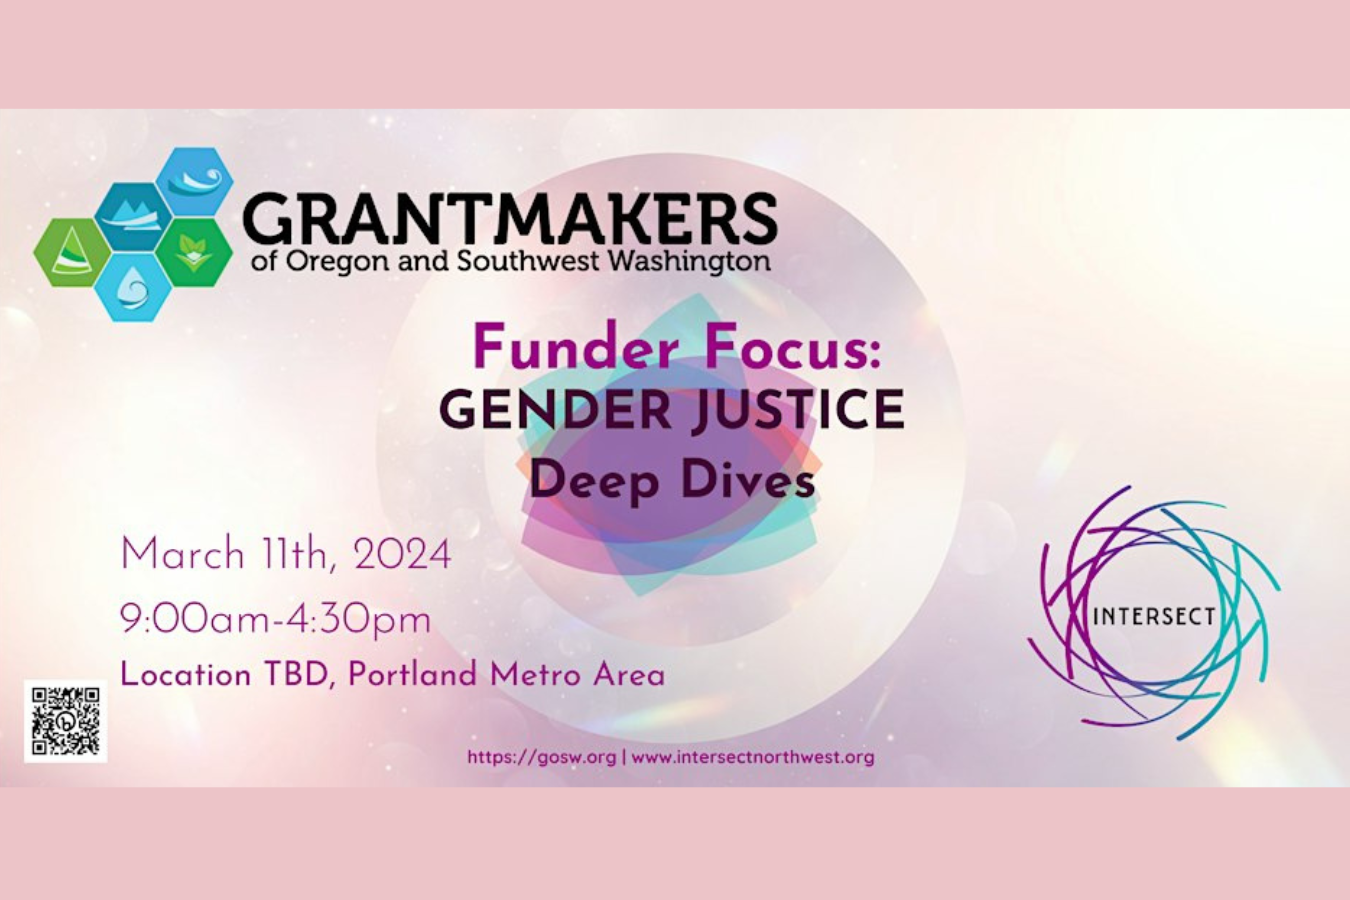 Feature image with a pink and purple background, the Grantmakers of Oregon and Southwest Washington logo, date March 4th, 2024, time 9 am - 4:30 pm and location TBD Portland Metro Area